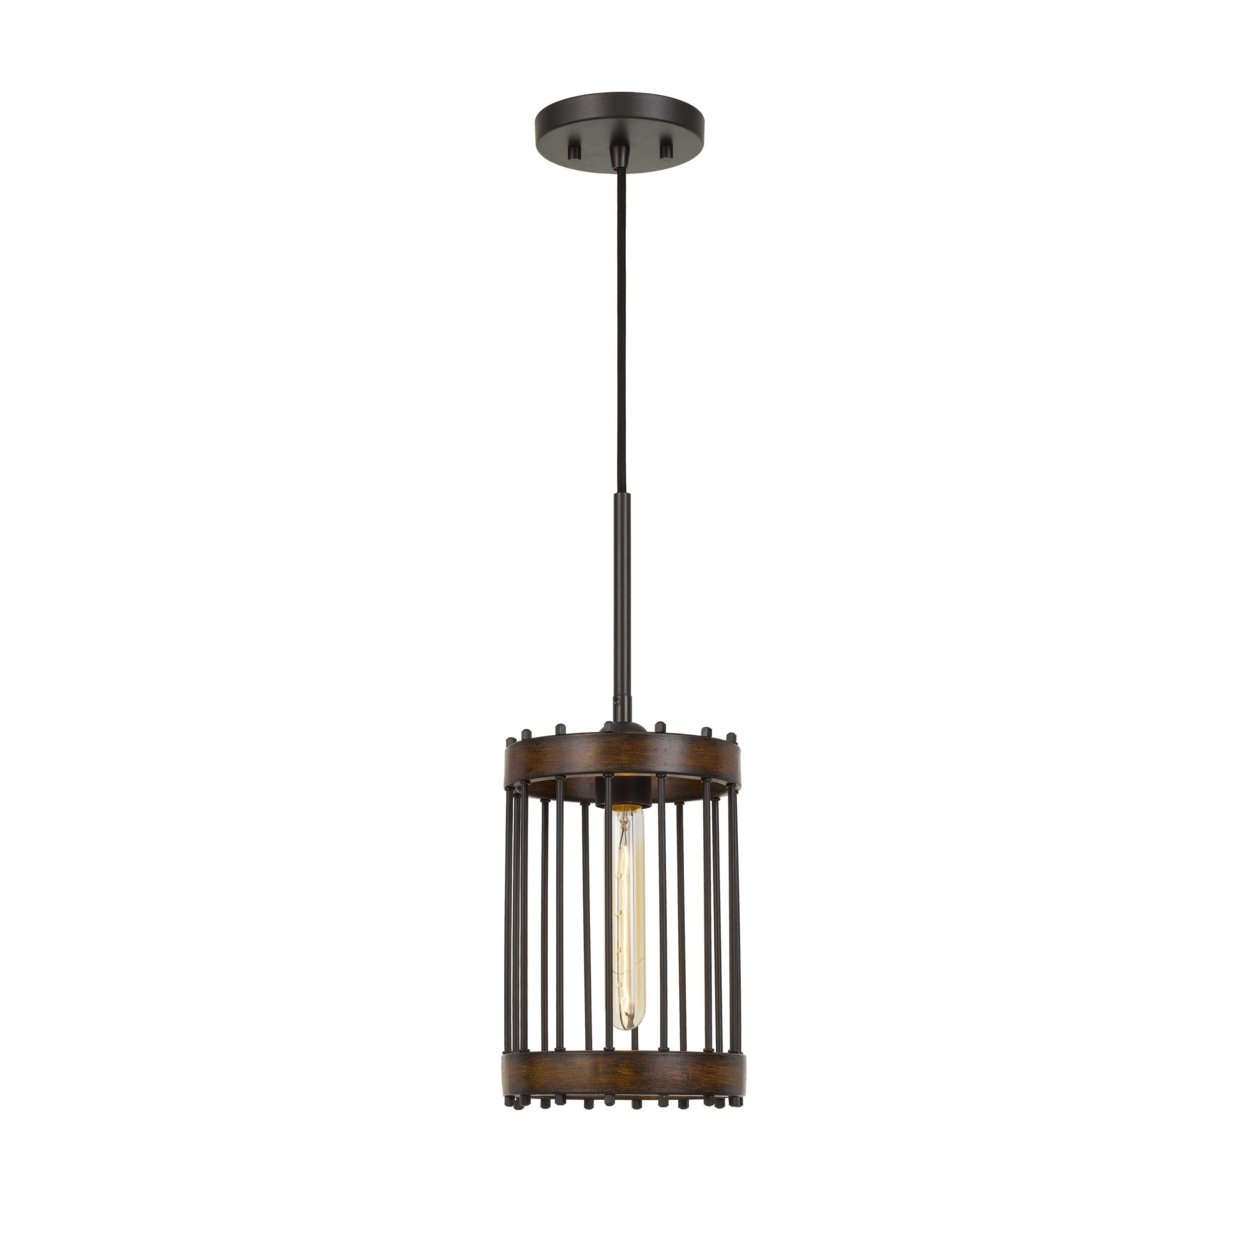 Caged Cylinder Design Metal Pendant Fixture With Canopy, Black And Brown- Saltoro Sherpi